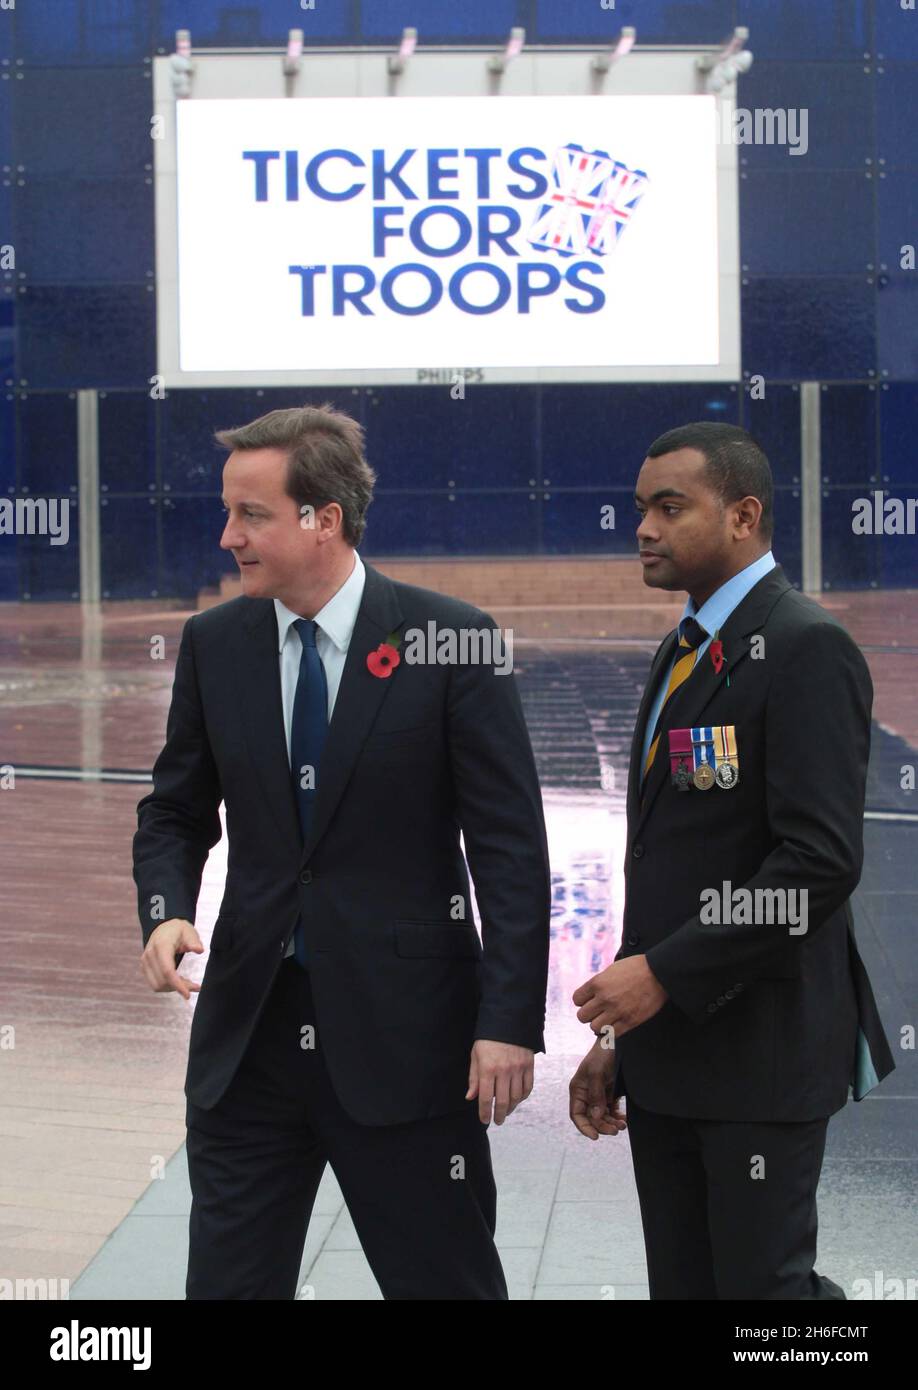 Conservative leader David Cameron launches his Tickets for Troops scheme encouraging promoters of music concerts and sporting events to give free tickets to soldiers. Picture shows: David Cameron with soldier Johnson Beharry Stock Photo